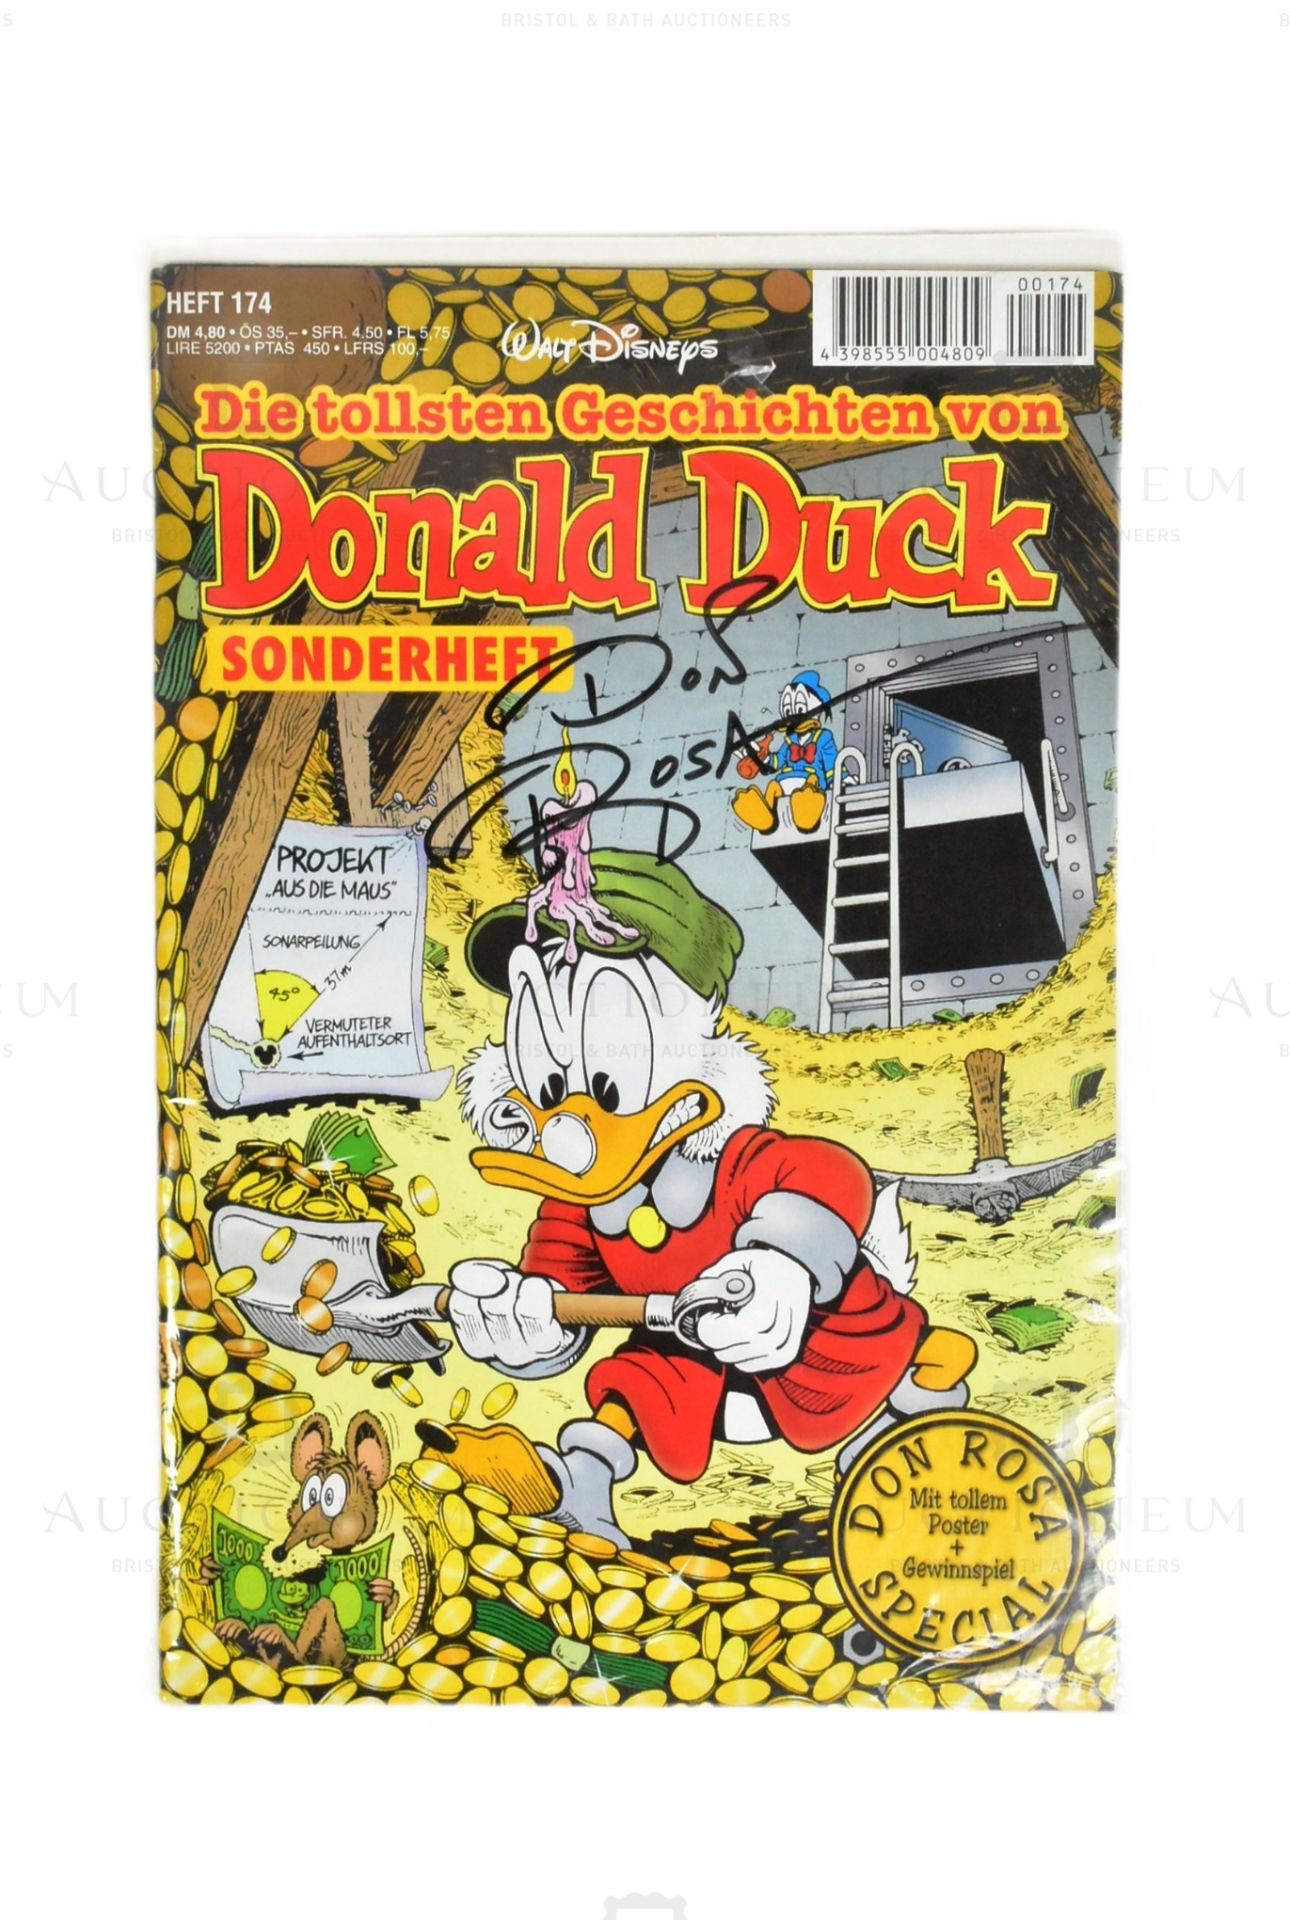 ESTATE OF JEREMY BULLOCH - DONALD DUCK - DON ROSA SIGNED COMIC BOOK